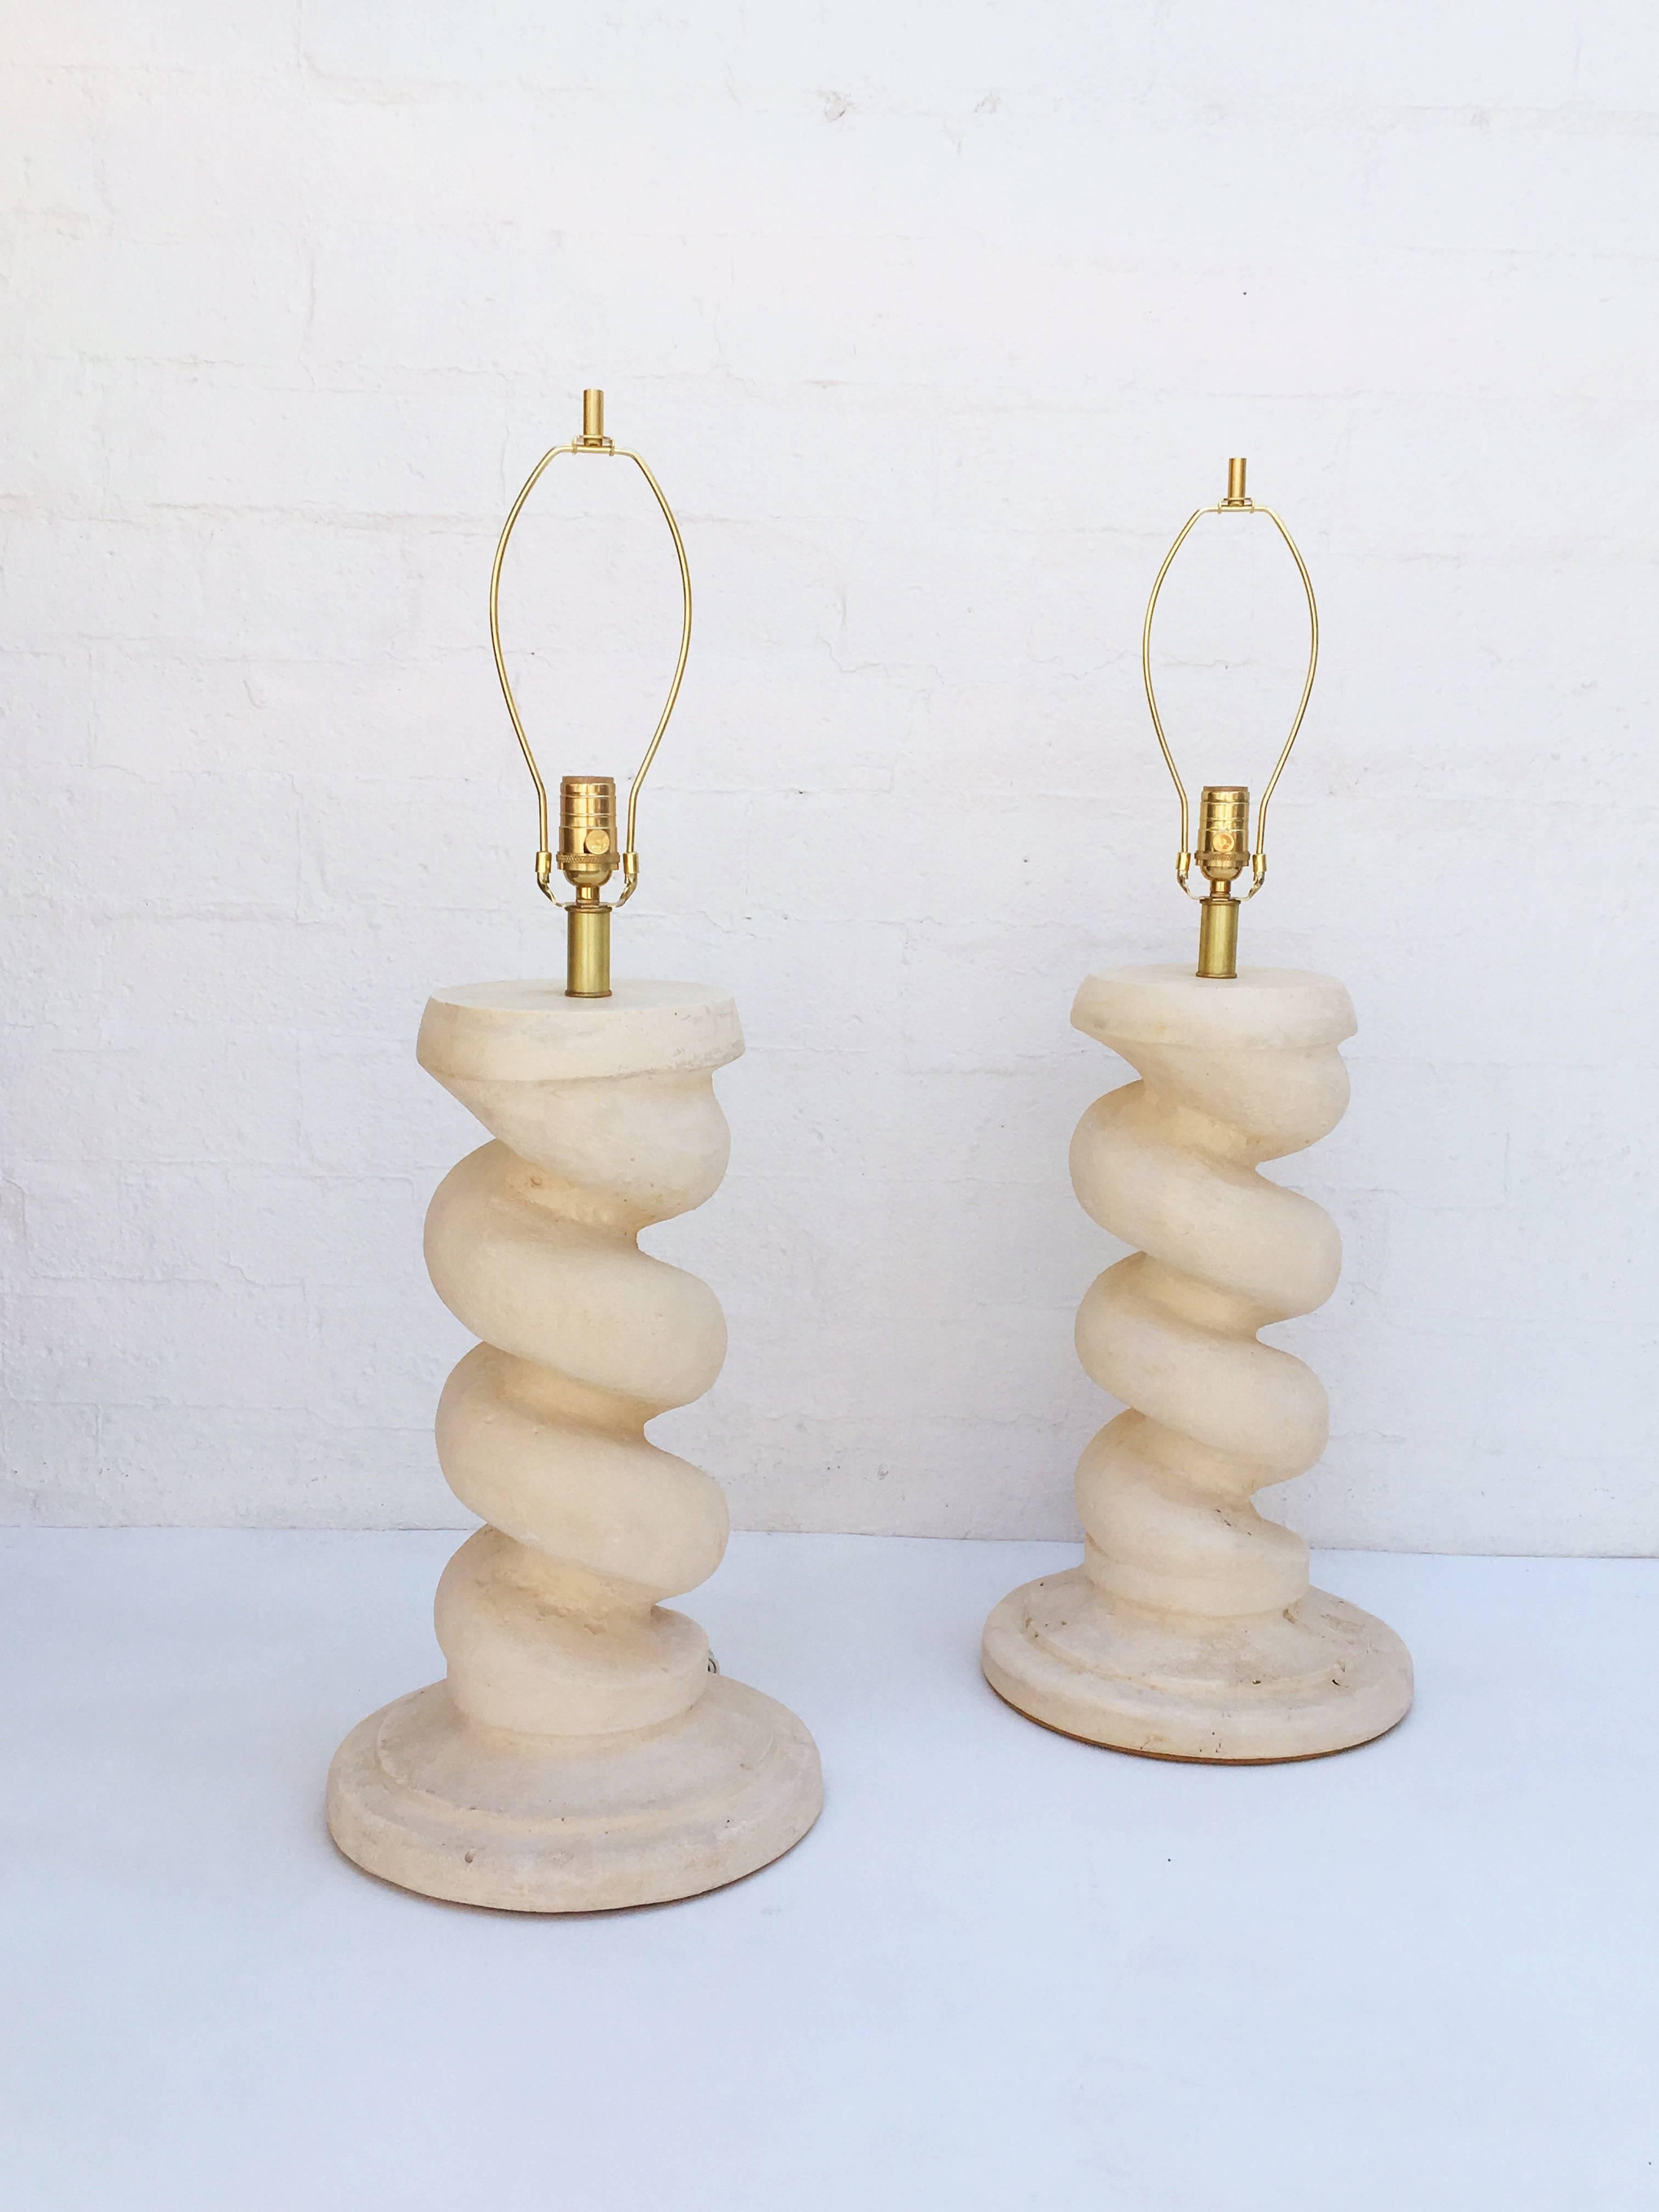 American Pair of Plaster Spiral Column Lamps by Michael Taylor